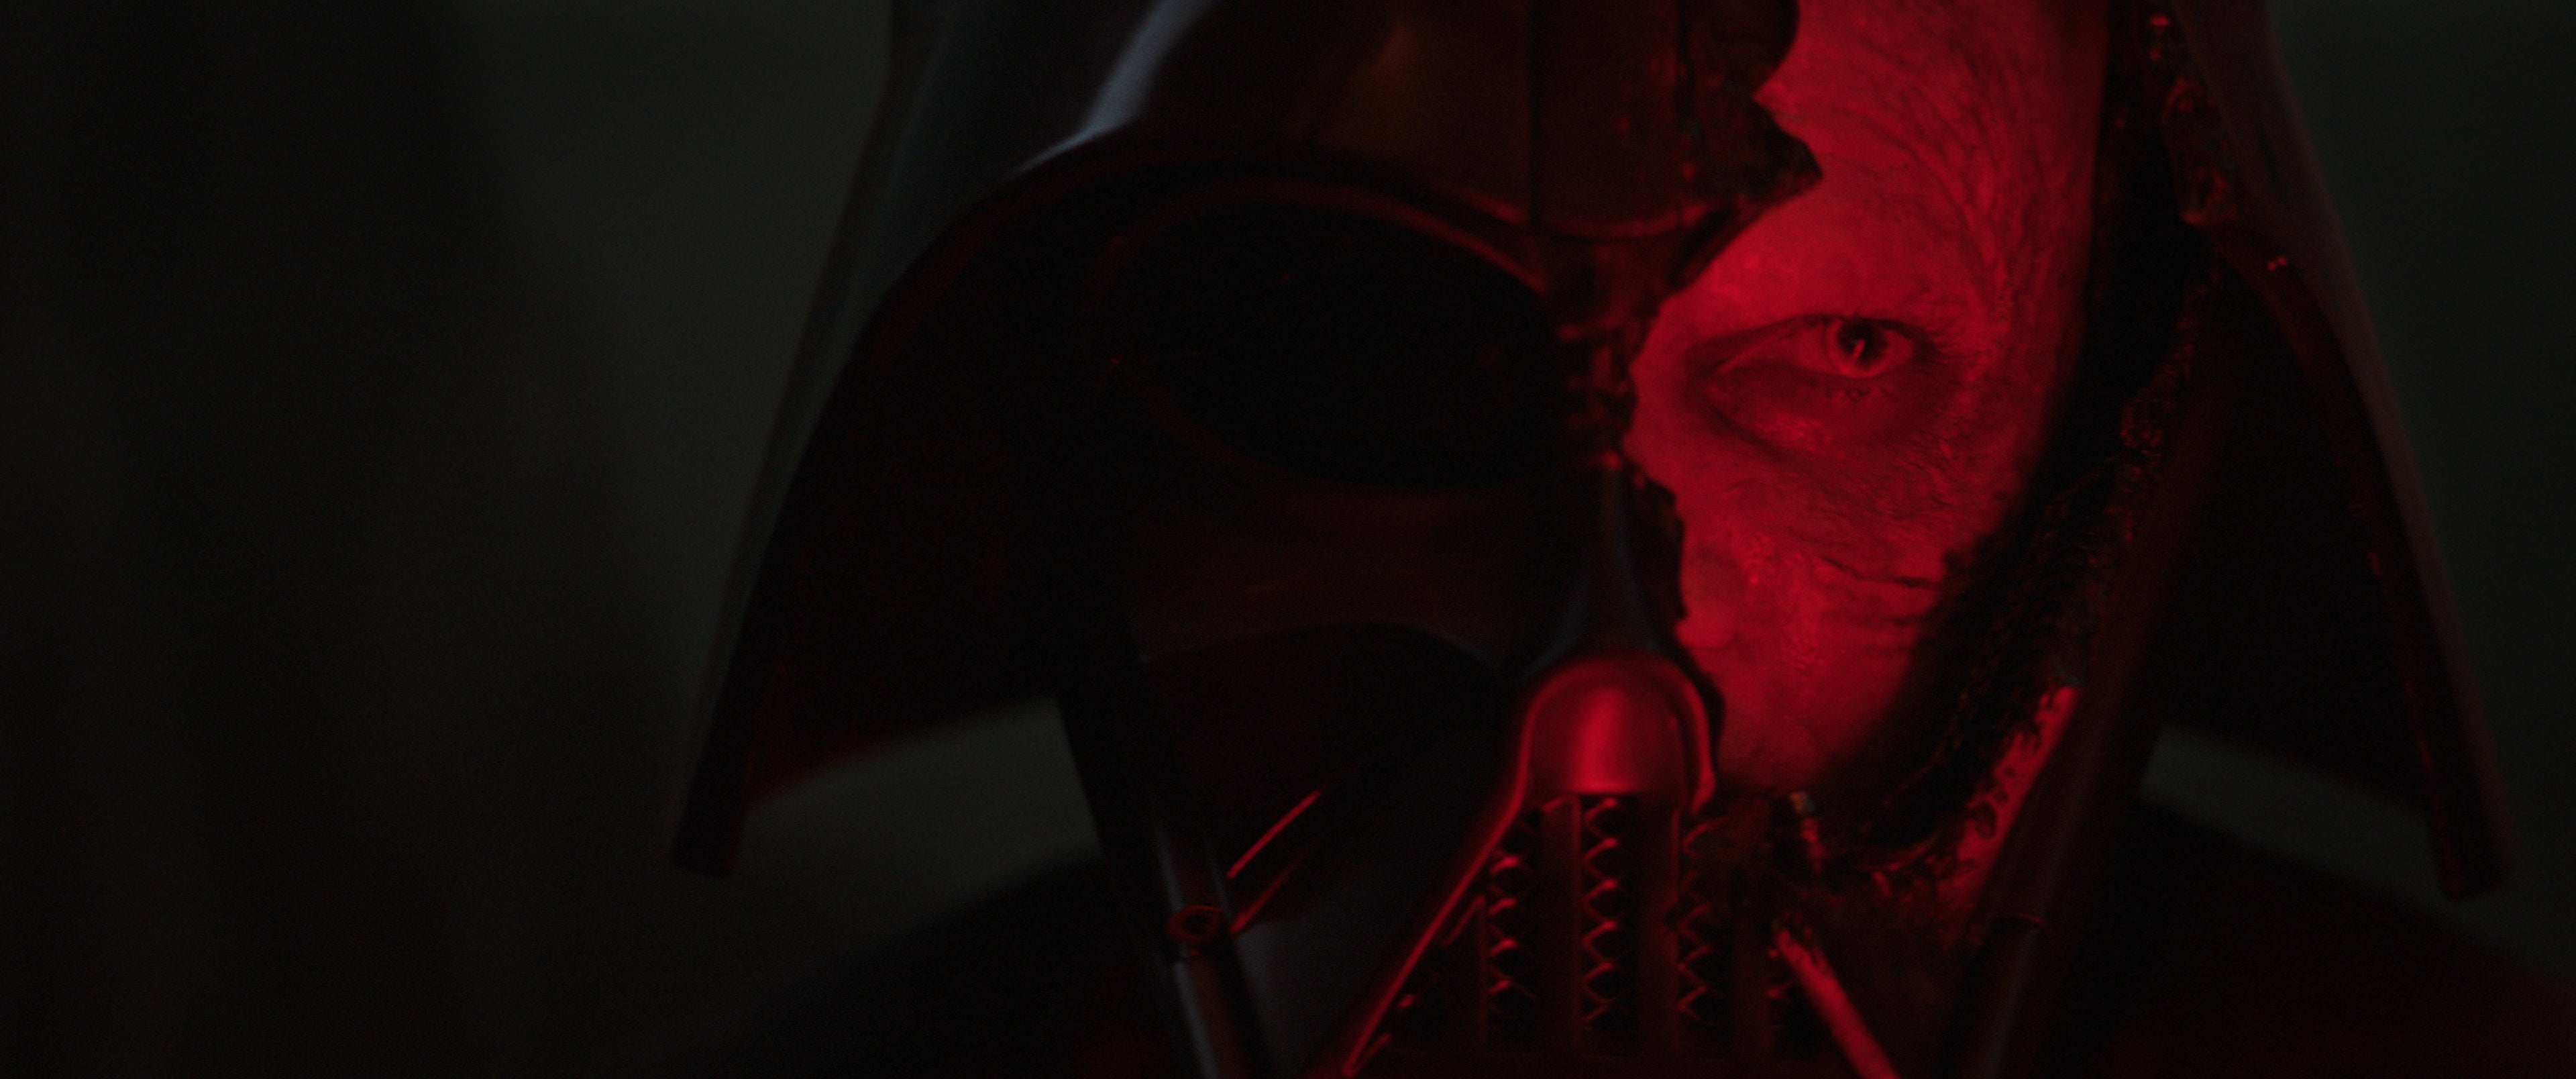 Image of Darth Vader with his helmet broken and face revealed